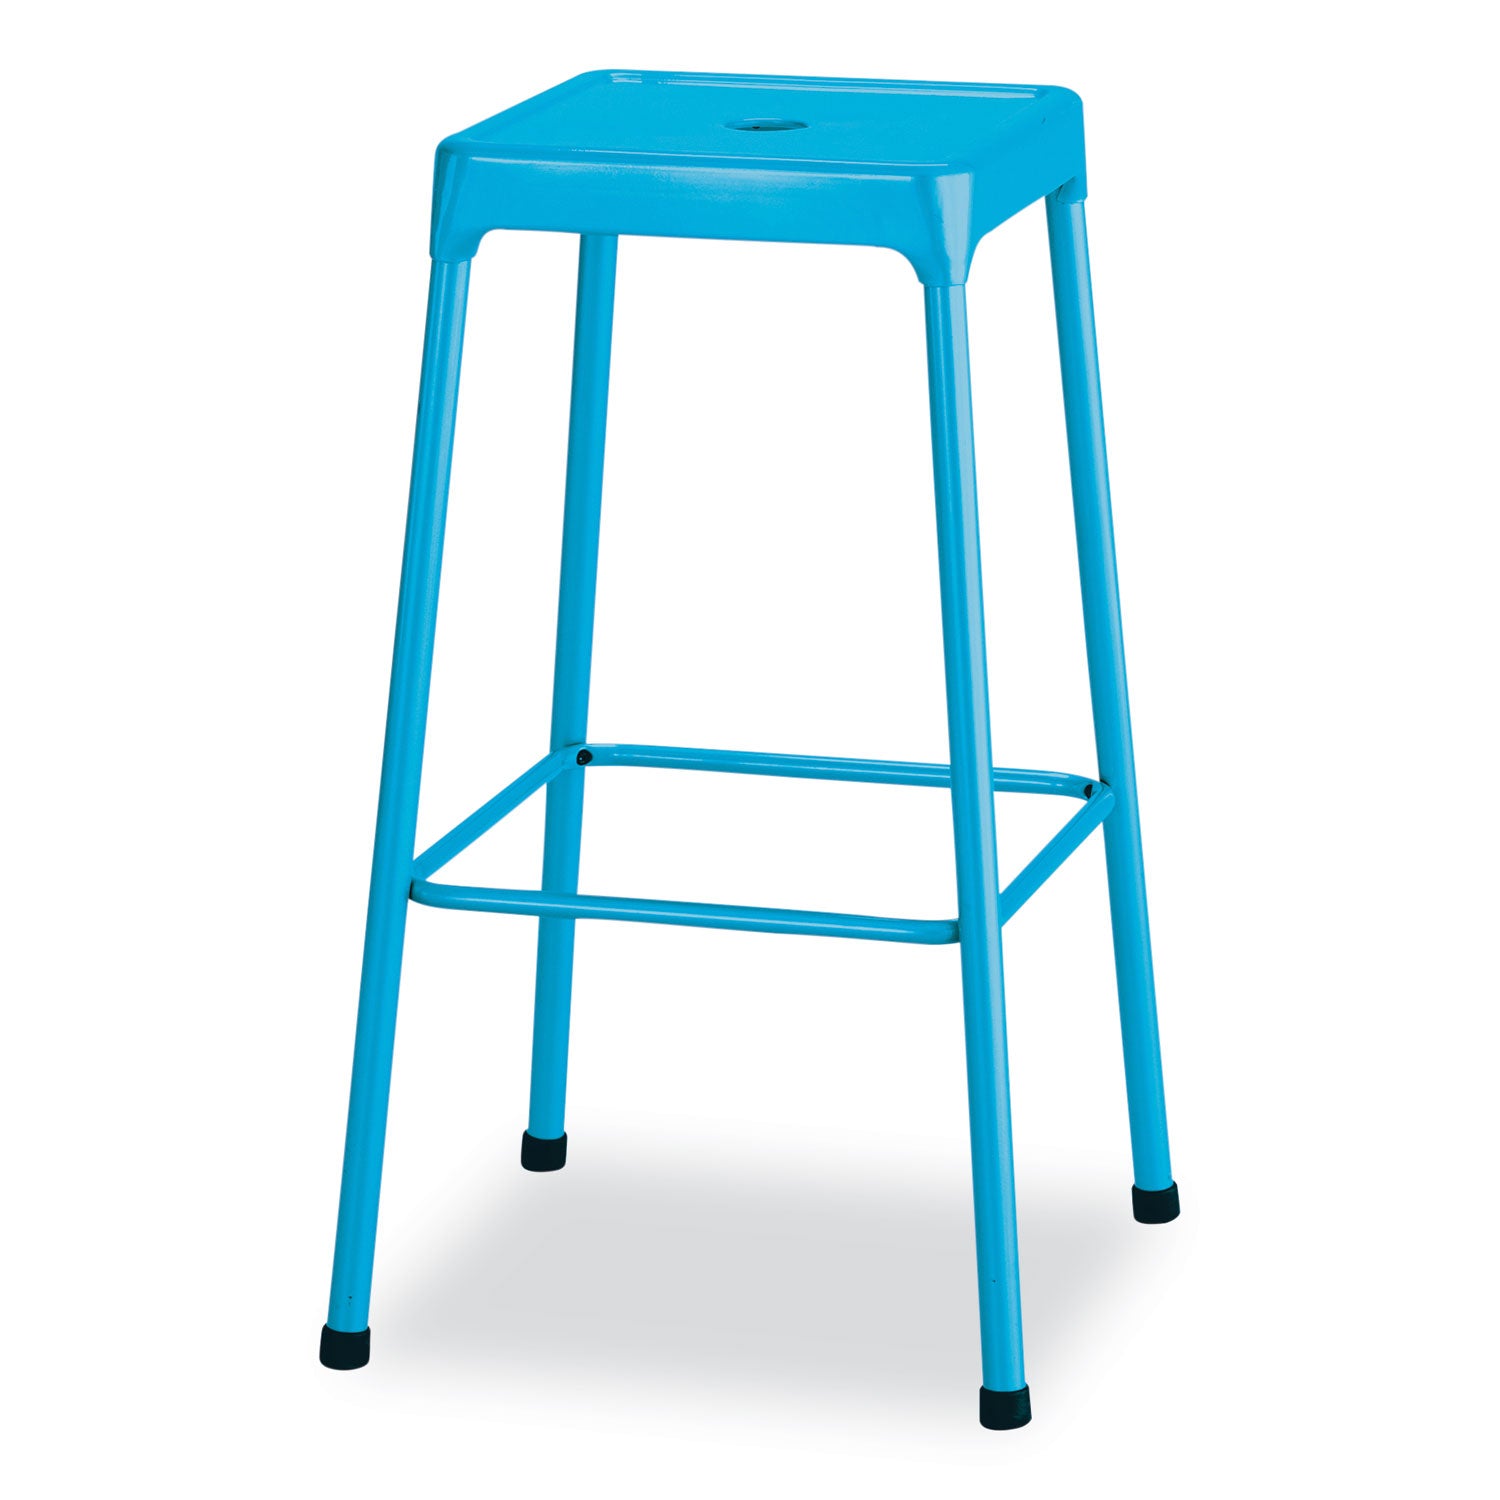 steel-bar-stool-backless-supports-up-to-275-lb-29-seat-height-babyblue-seat-babyblue-base-ships-in-1-3-business-days_saf6606bu - 1